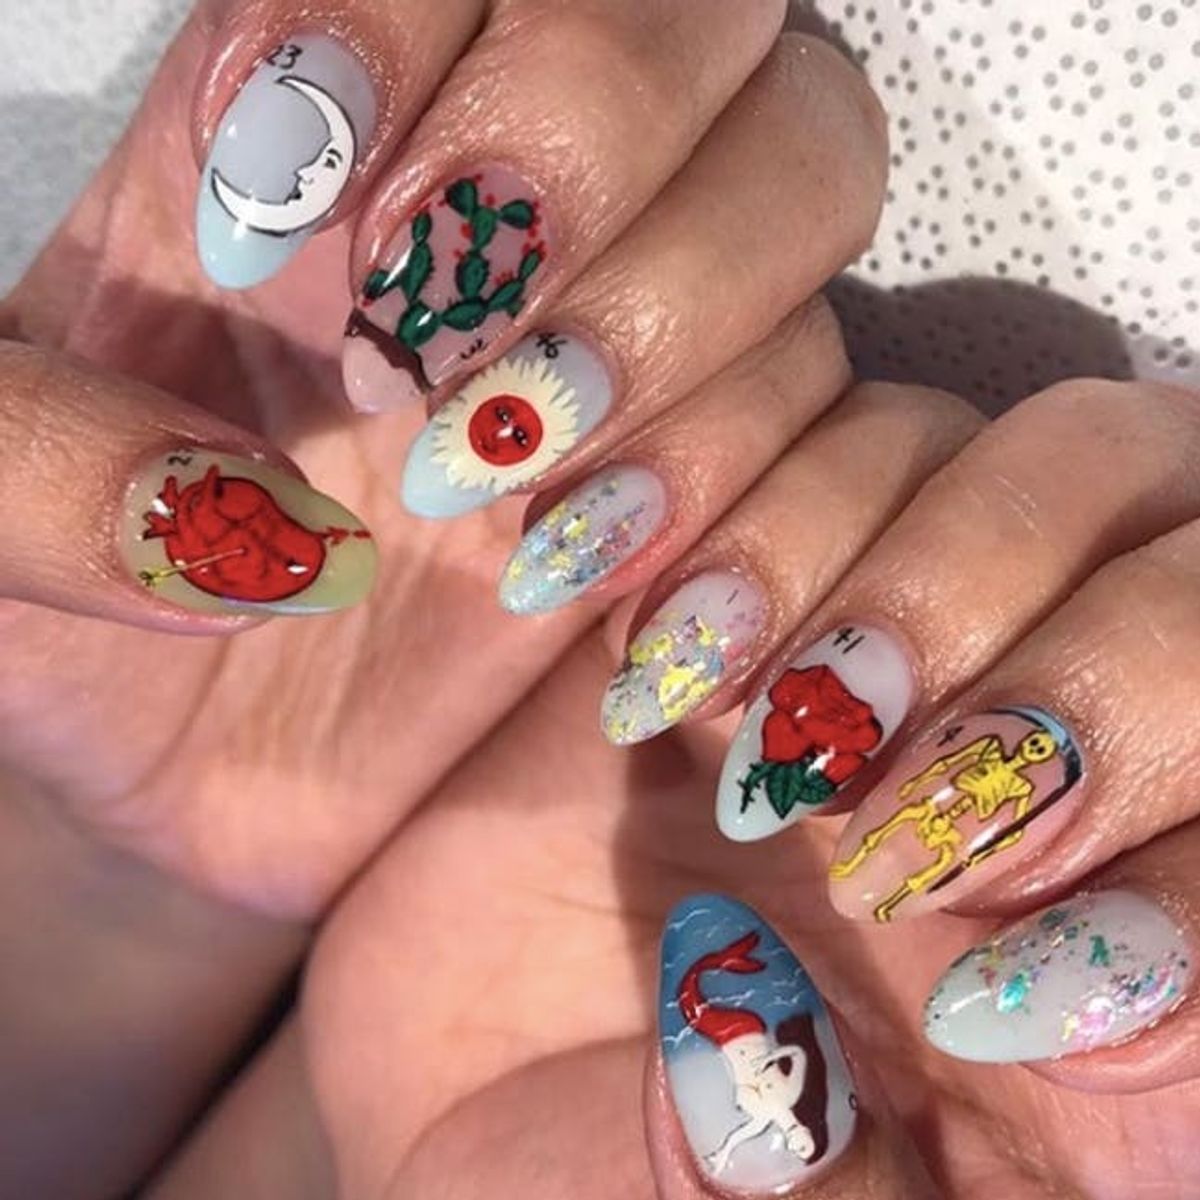 12 Tarot Card Nail Art Ideas to Round Out Your Halloween Look